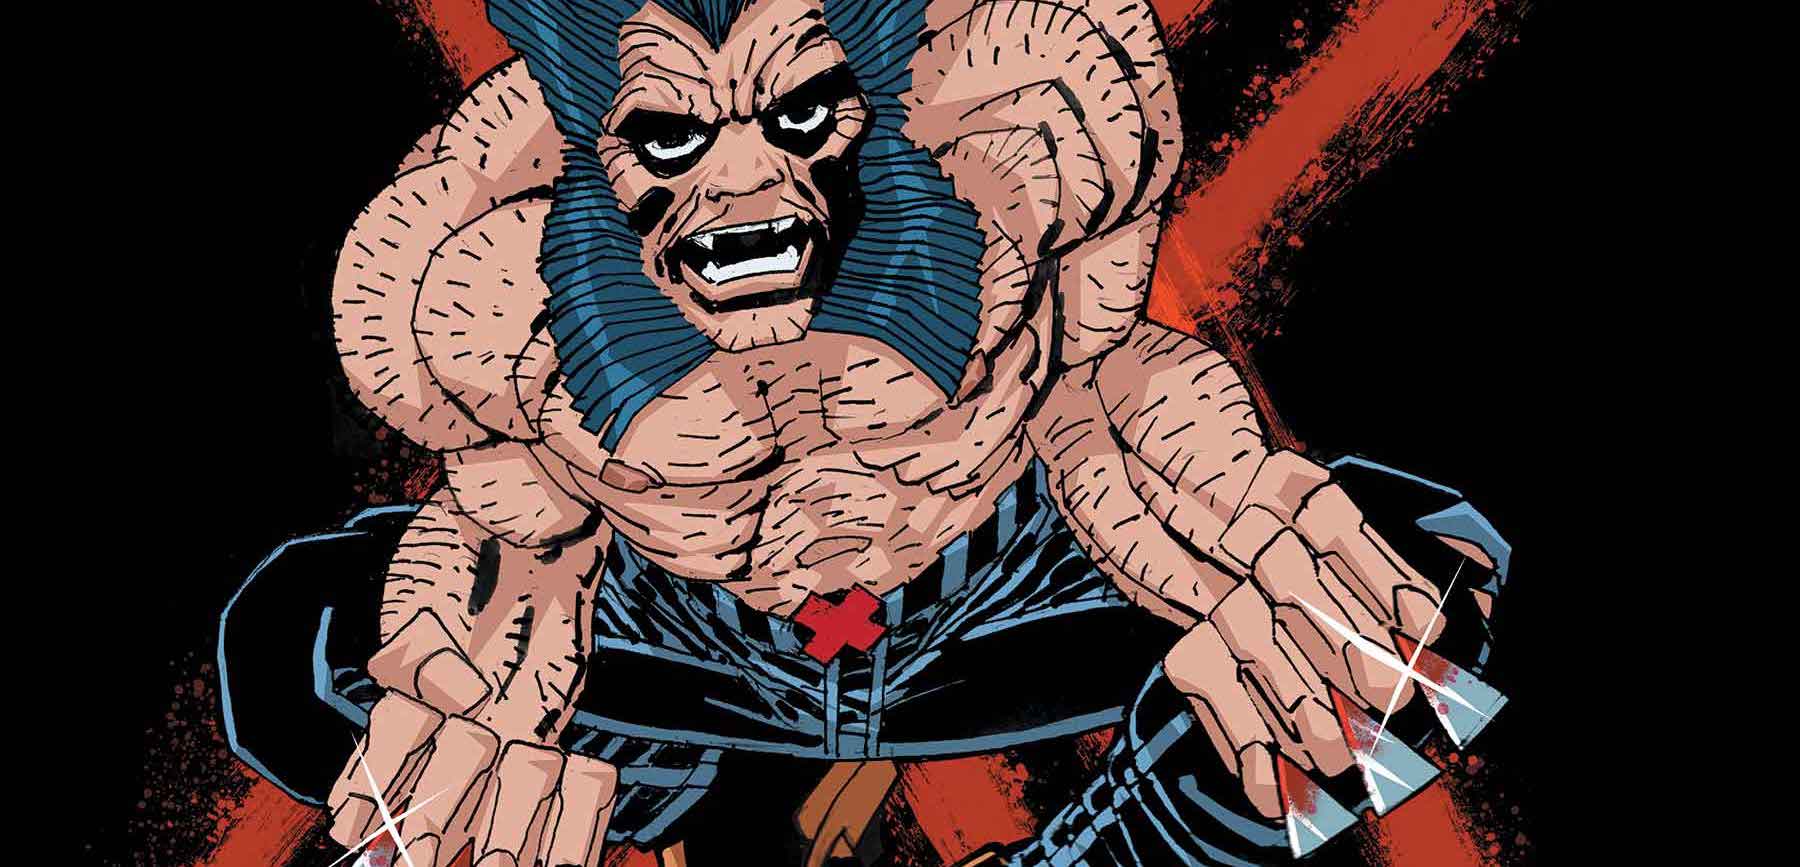 Frank Miller takes a stab at Wolverine for 'Weapons of Vengeance Alpha' #1 cover